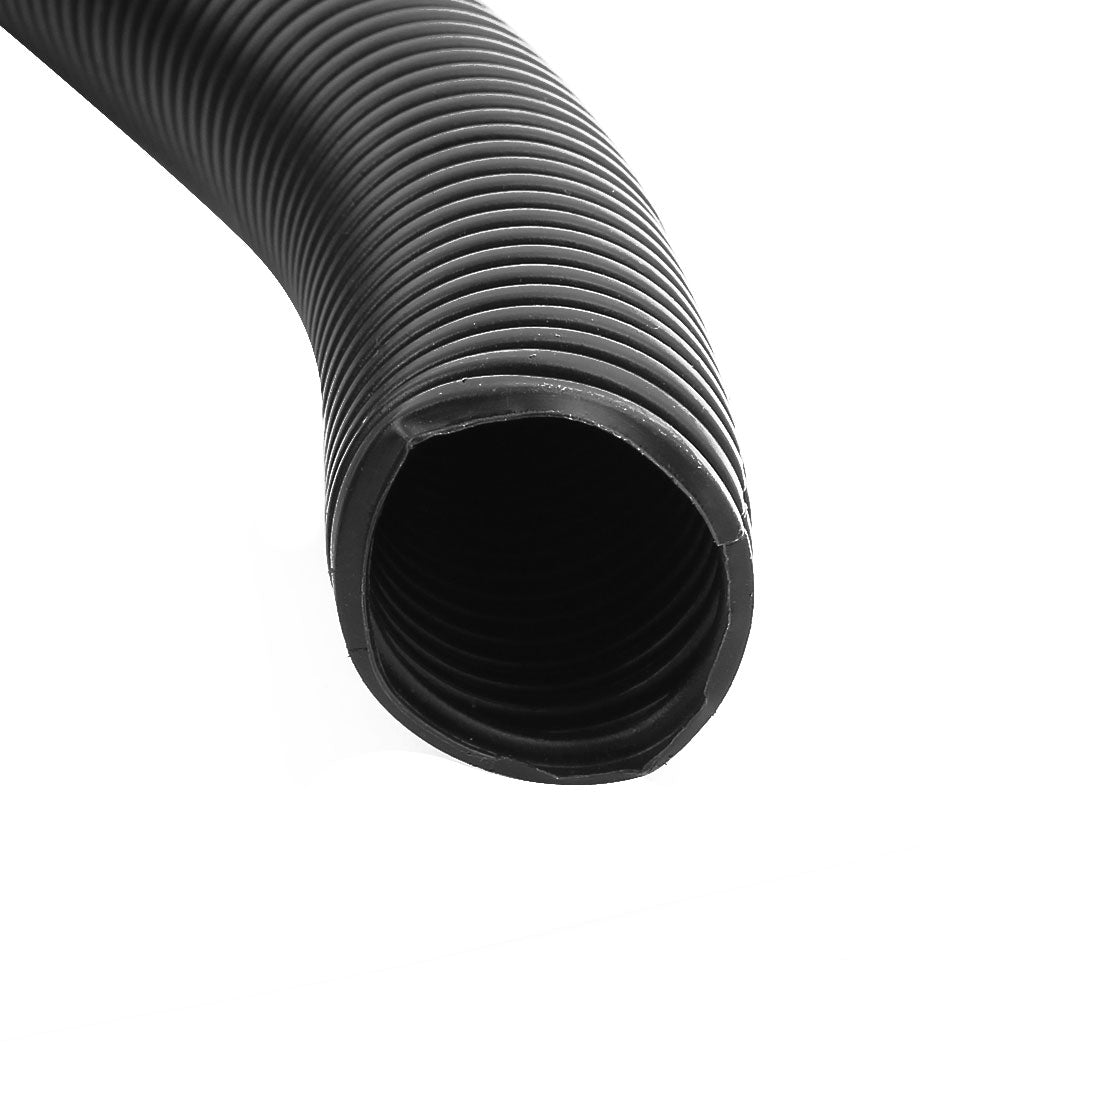 uxcell Uxcell 10 M 29 x 34.5 mm Plastic Corrugated Conduit Tube for Garden,Office Black